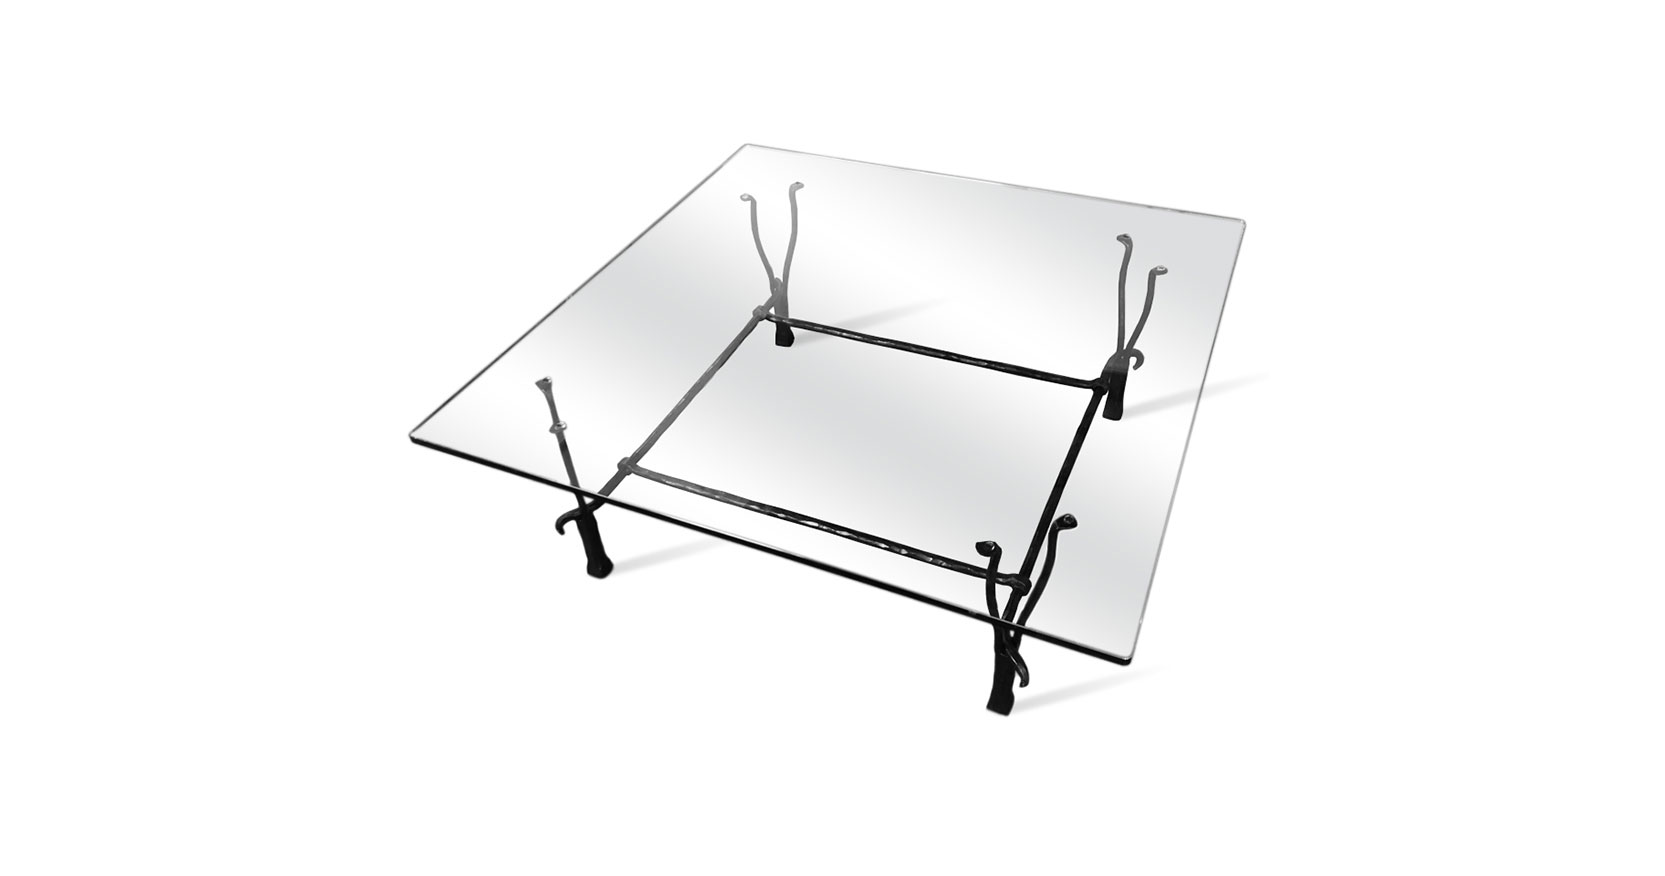 Garouste Bonetti, rectangular minimalist square coffee table, glass top, black wrought iron legs that divide into two forks that support the top